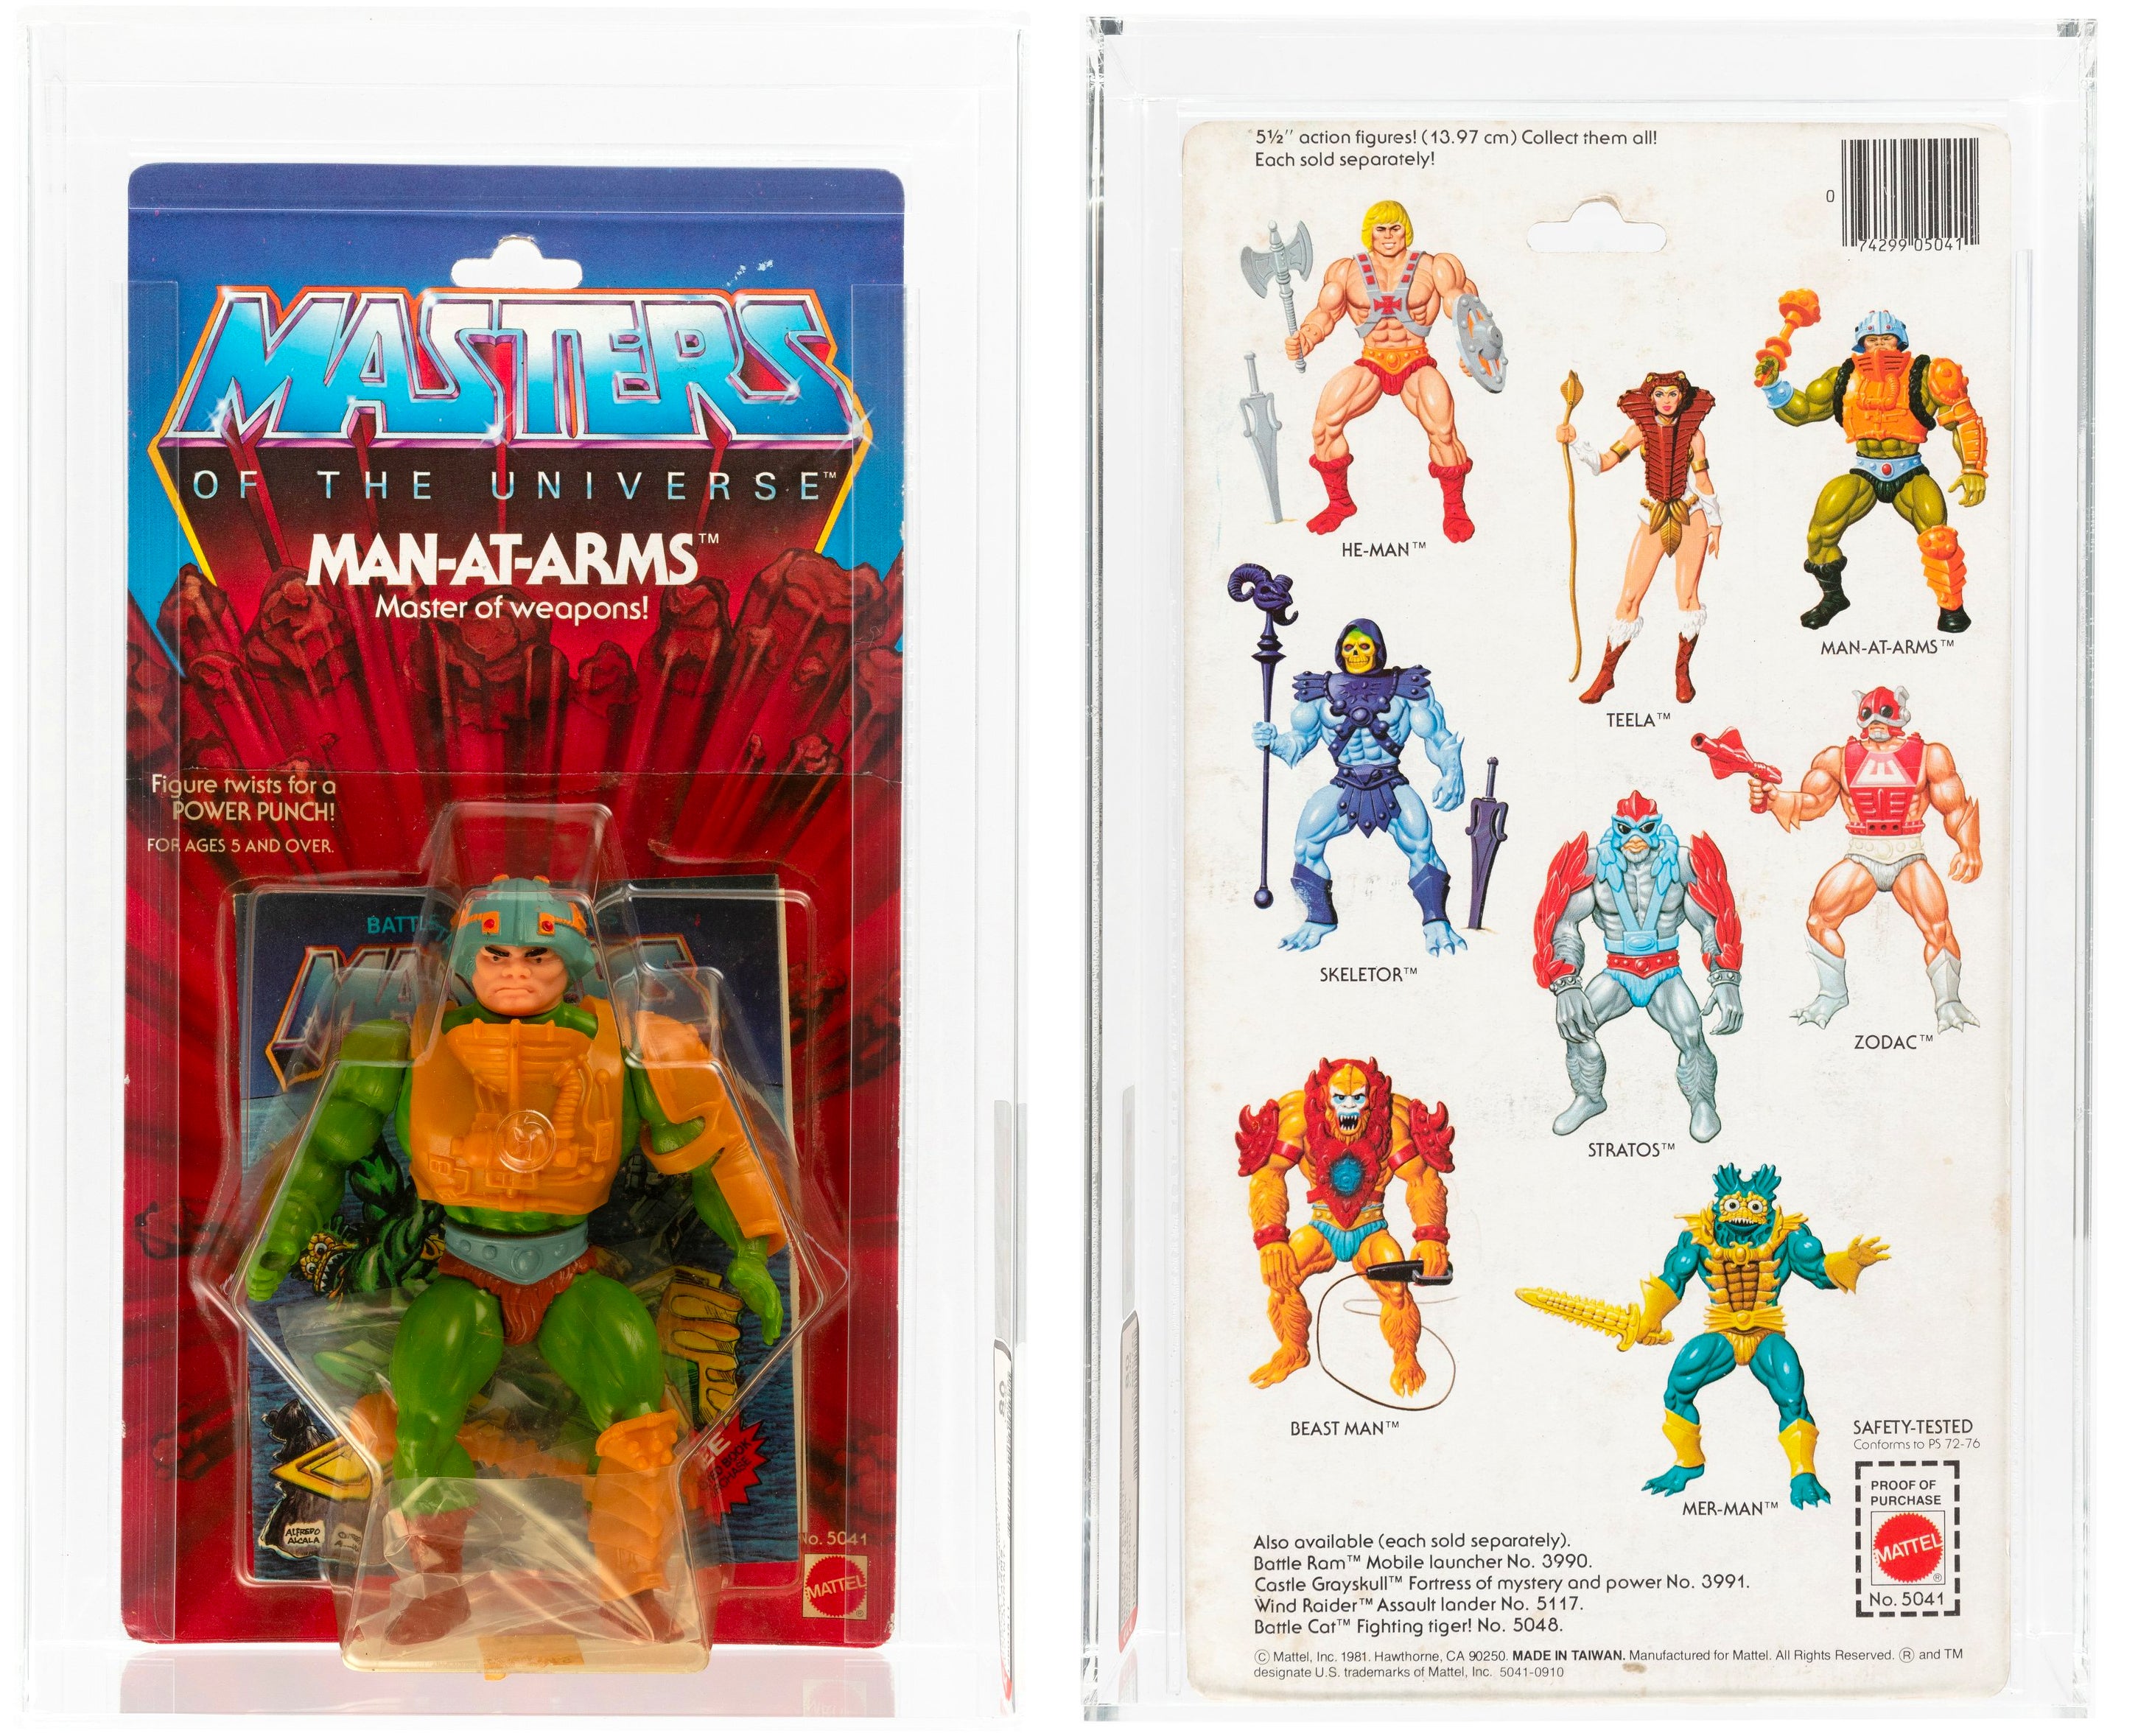 This Nostalgic Toy Auction Will Make You Wish All Your Childhood Toys Were Still Mint in the Box